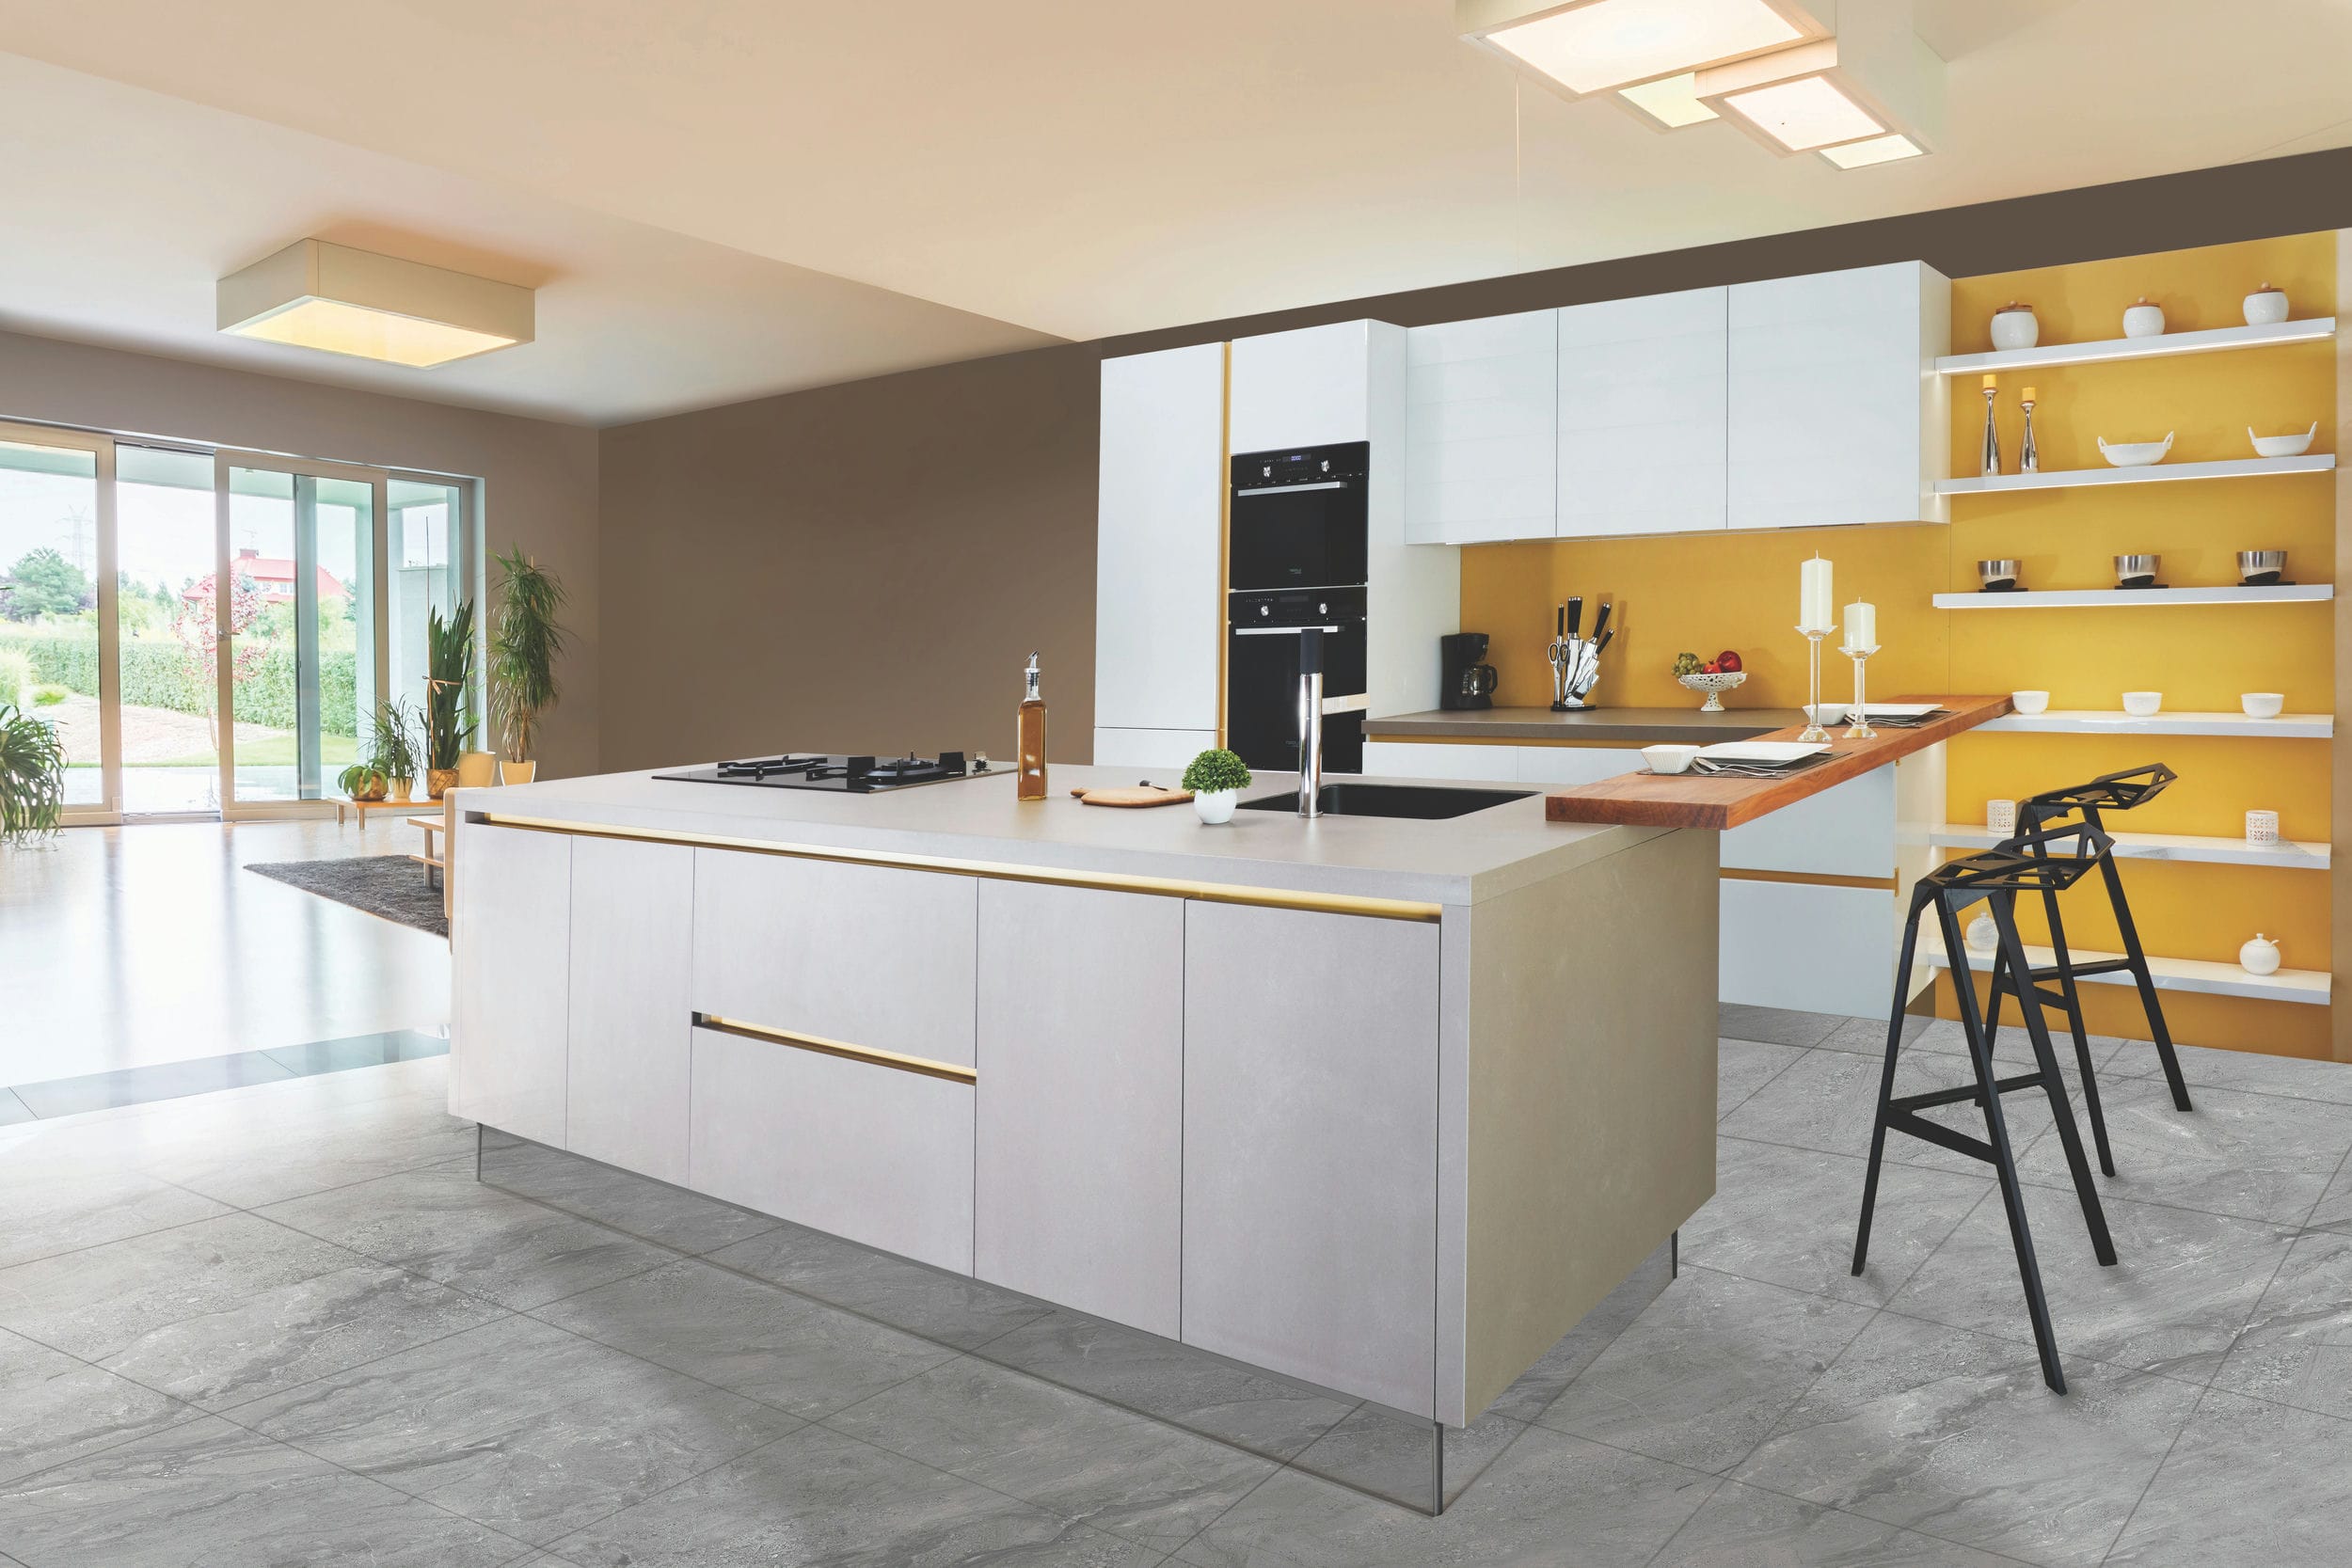 Should You Choose A Handleless Kitchen The Pros And Cons Kitchen Warehouse